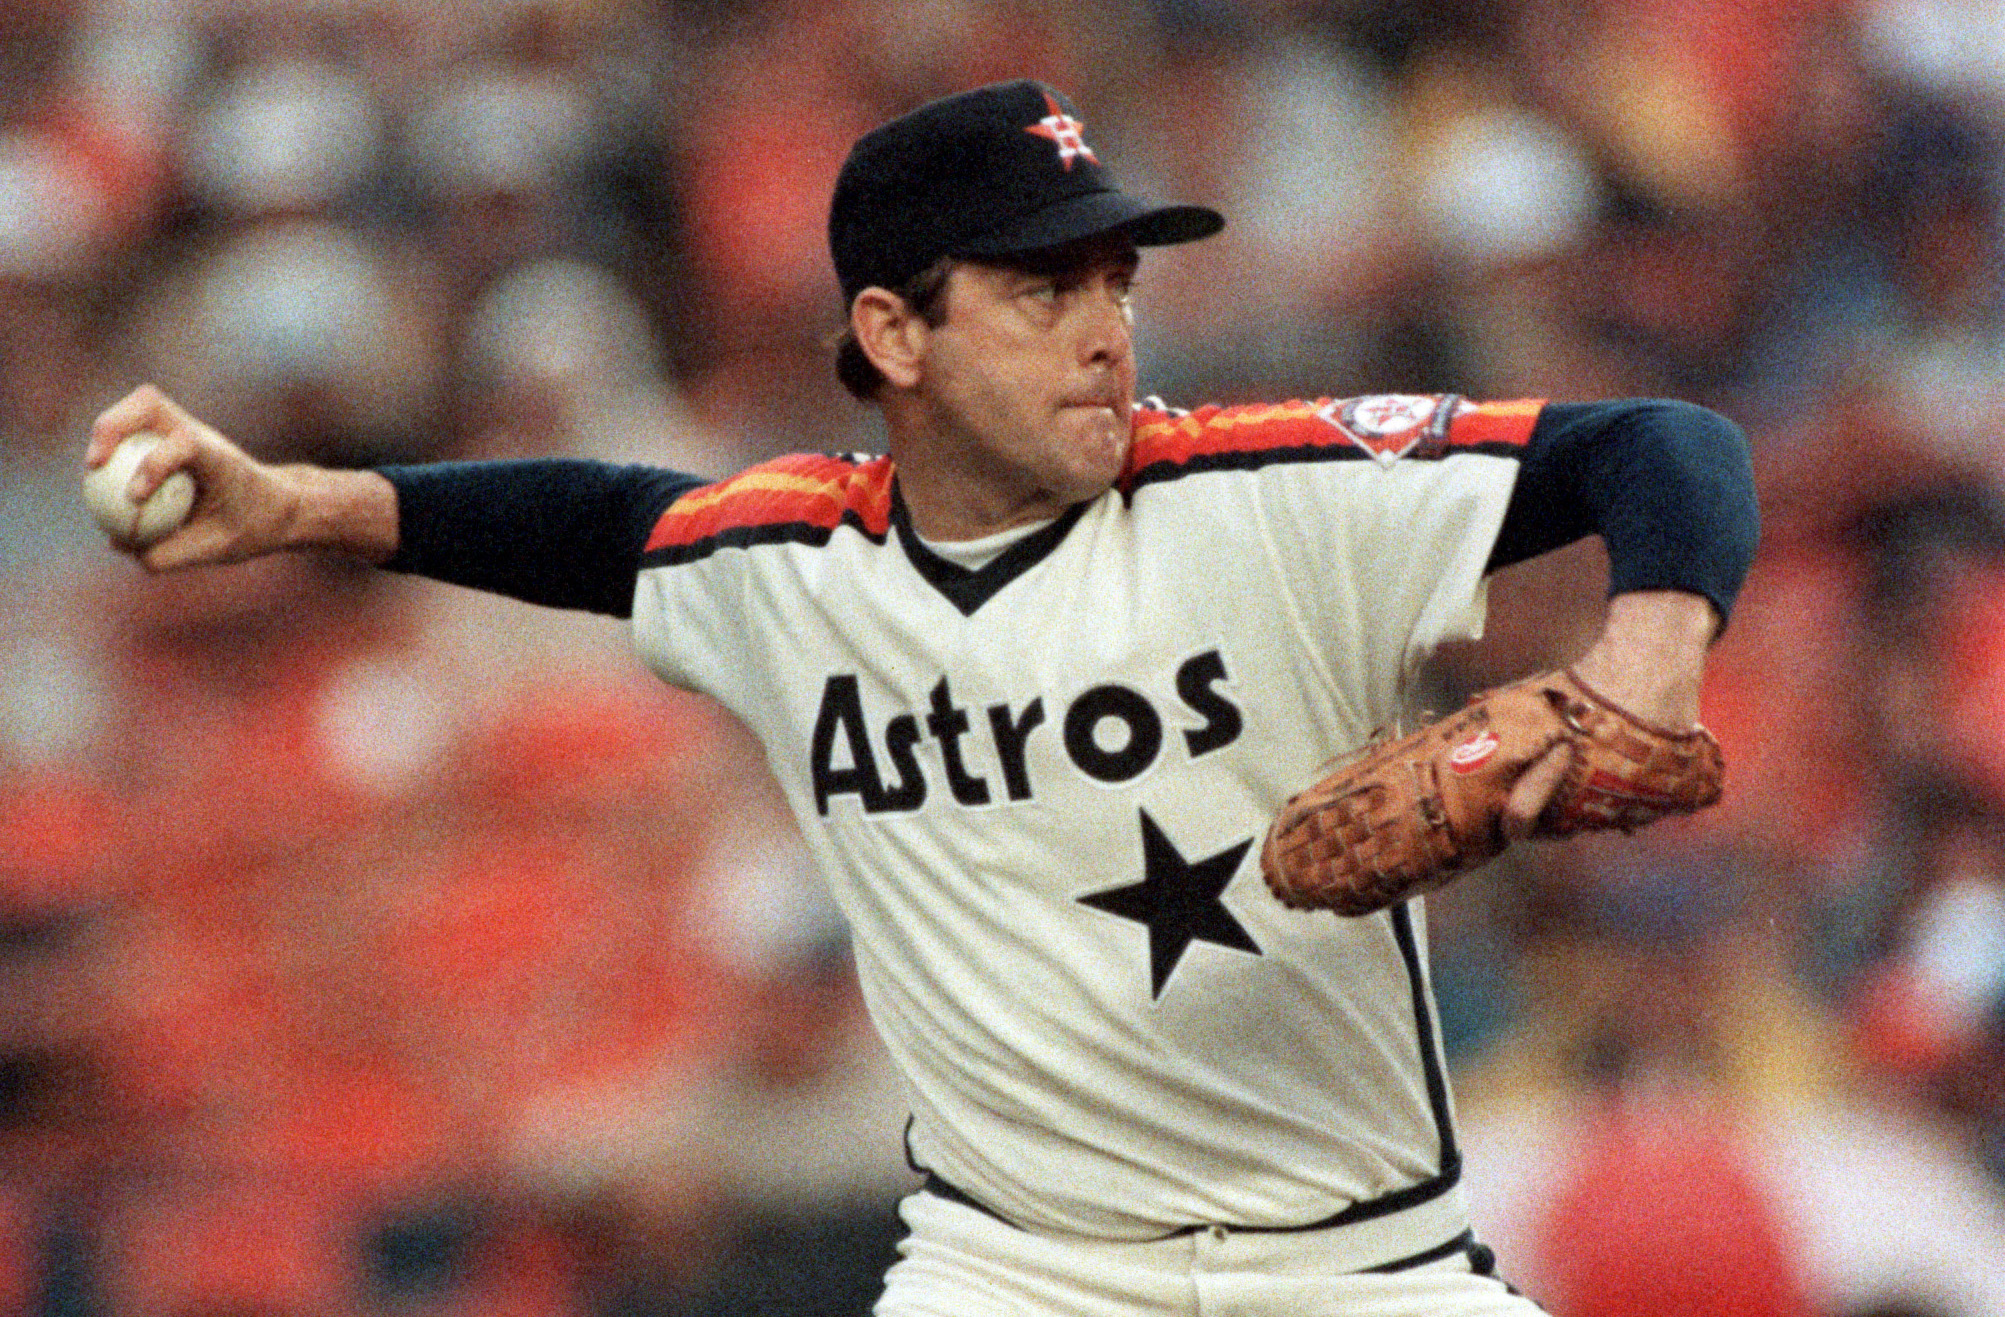 Nolan Ryan of the Houston Astros pitches against the Pittsburgh